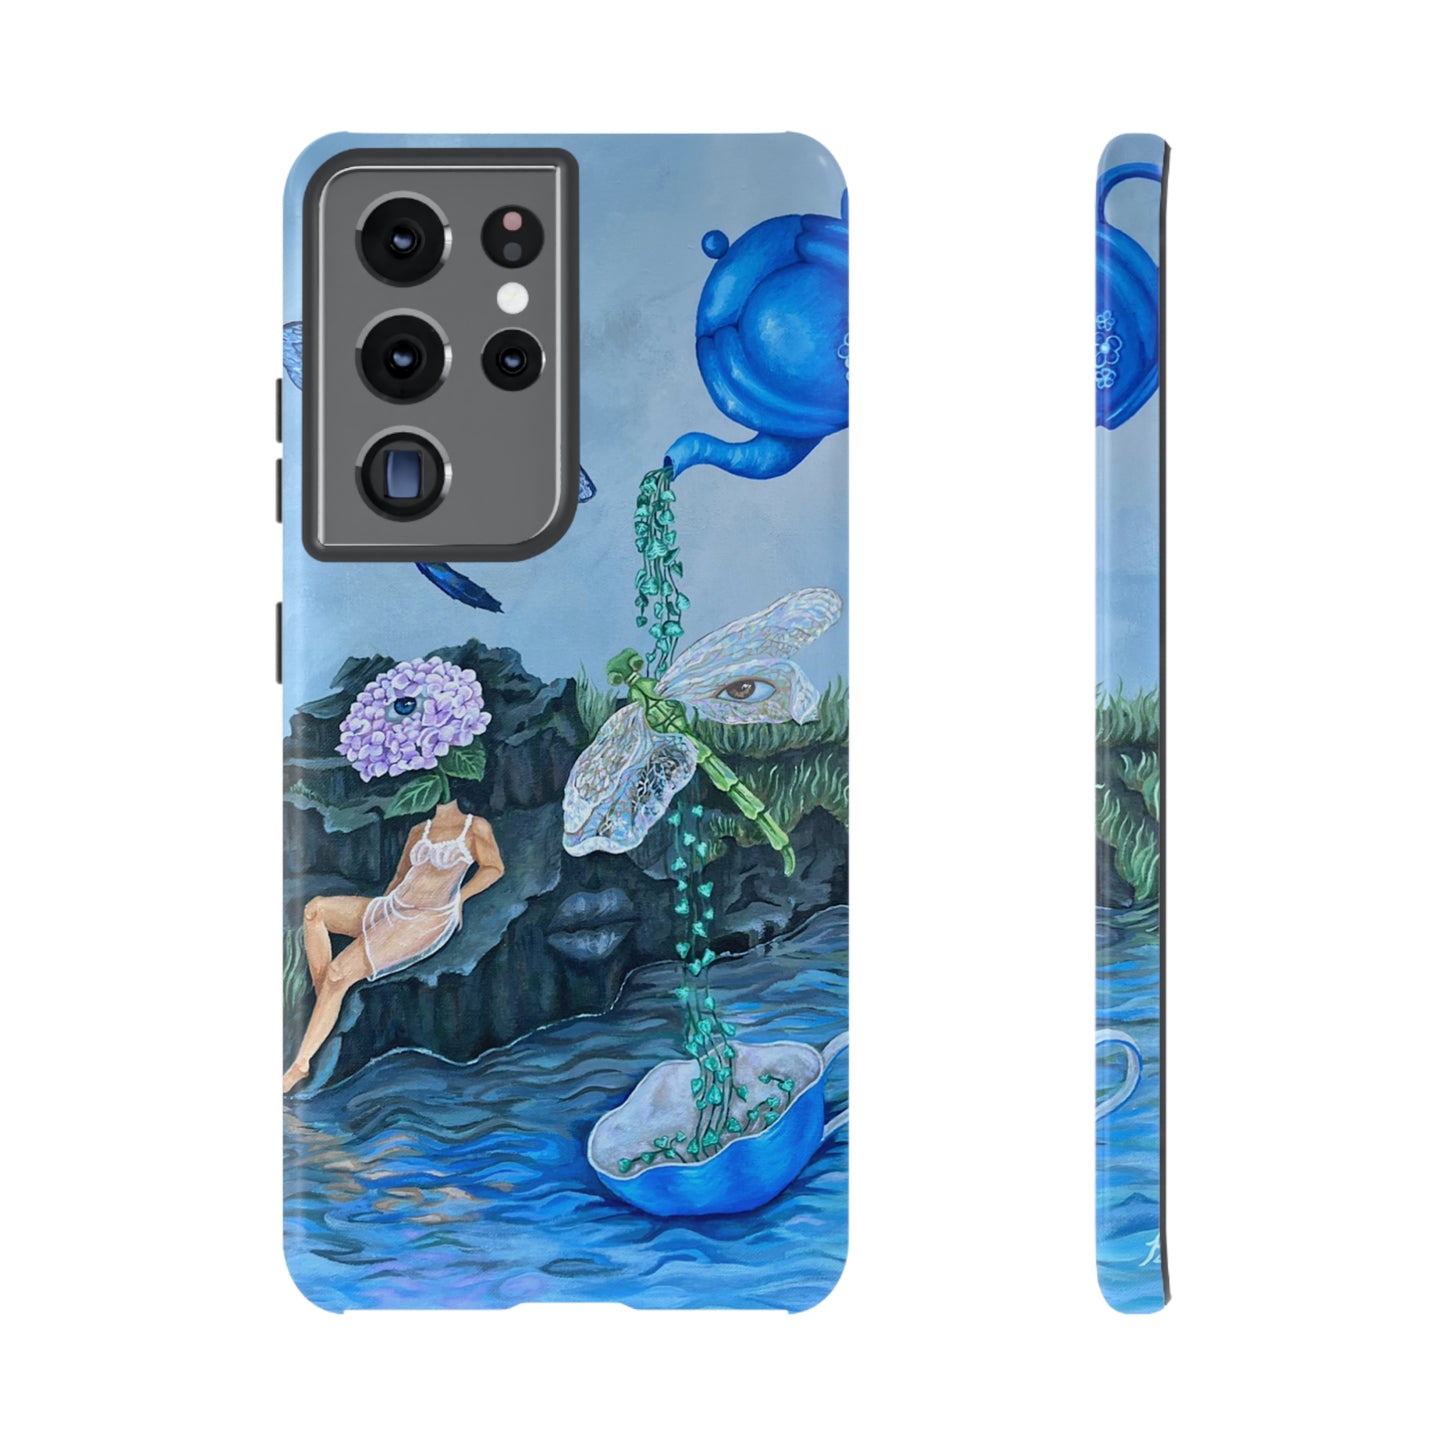 "Looking for a Place to Heal" Phone Case